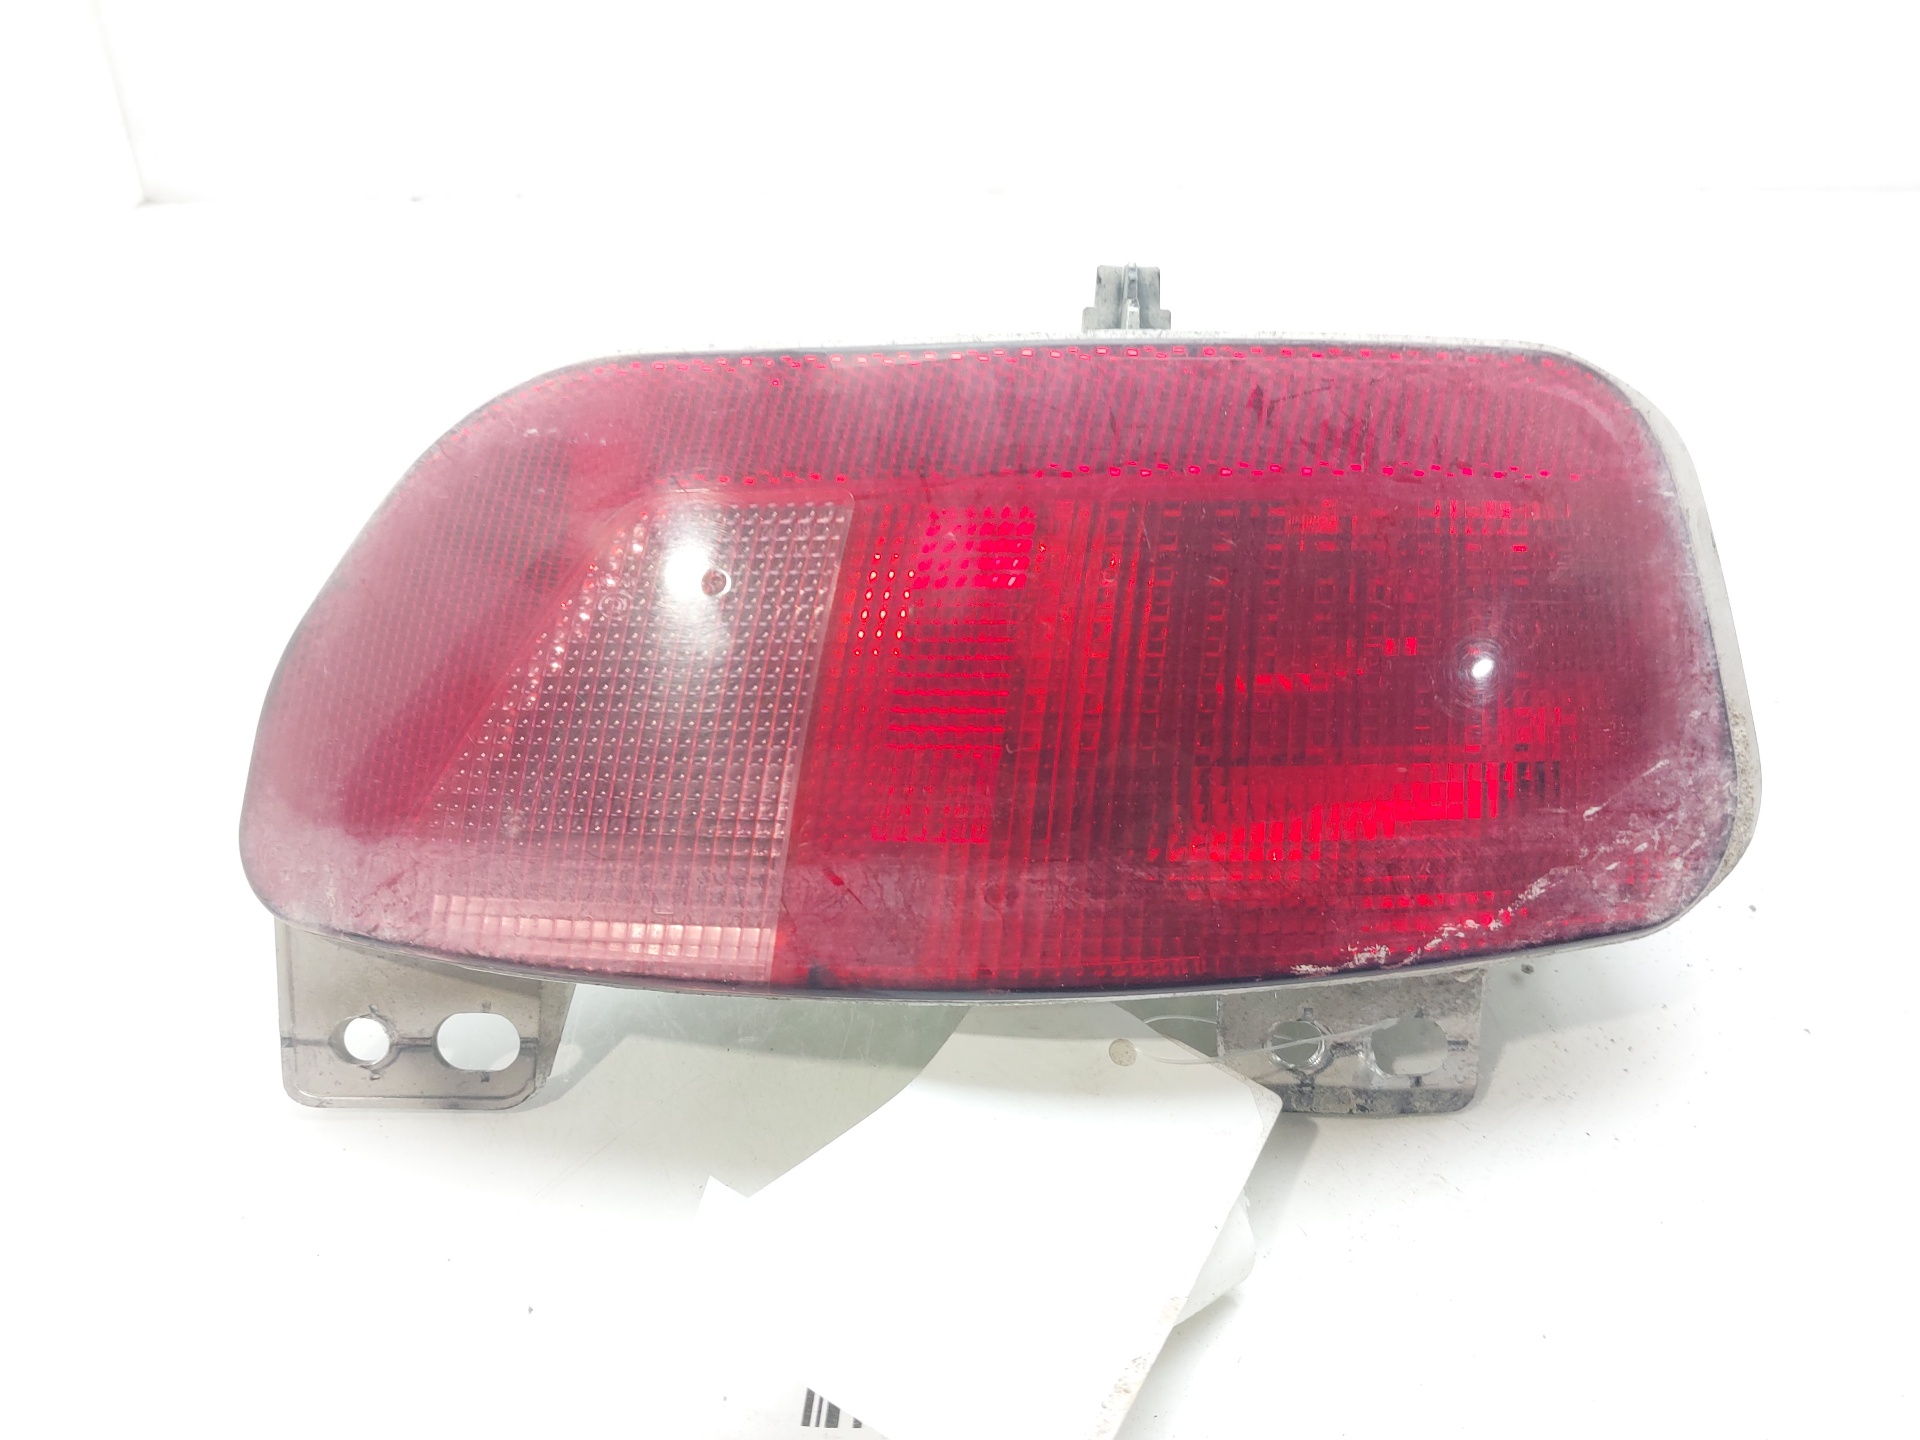 CITROËN C4 Picasso 2 generation (2013-2018) Other parts of headlamps 9676122780 24138126